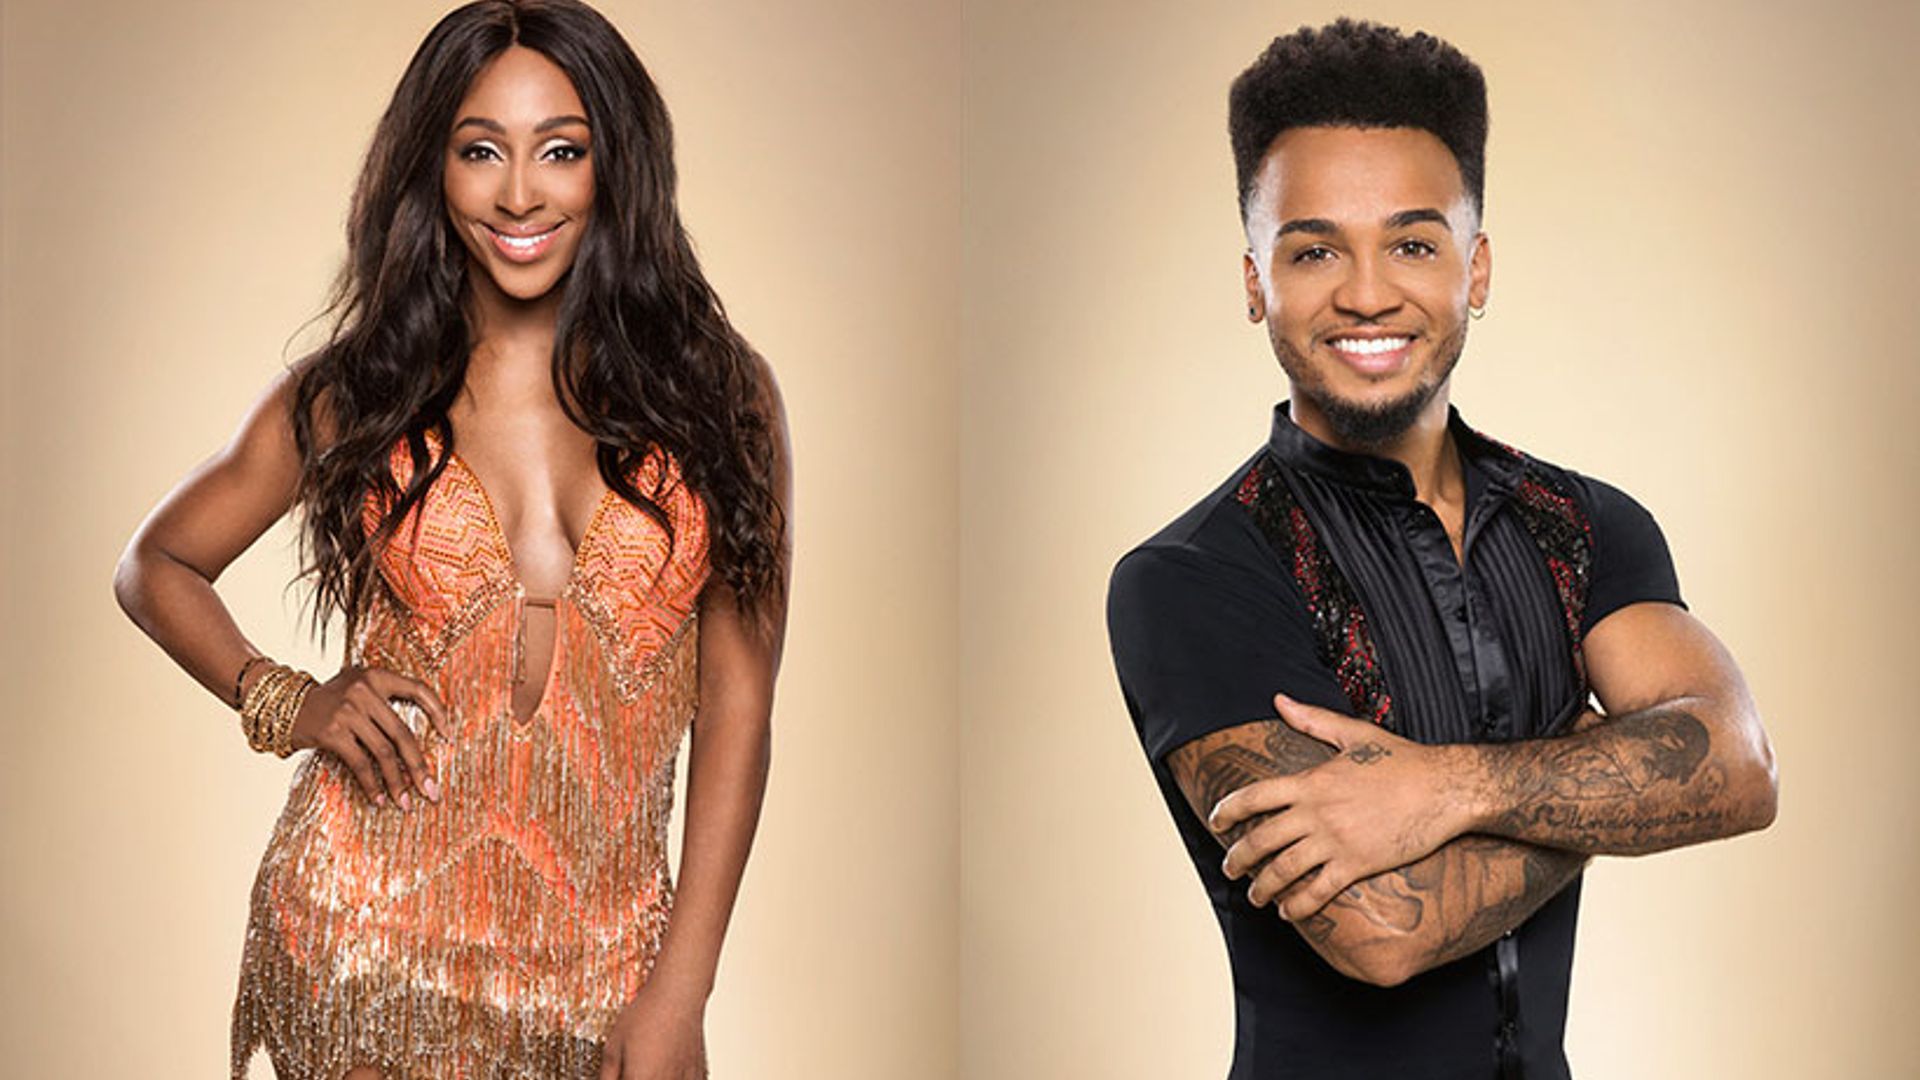 Alexandra Burke and Aston Merrygold told off by Strictly dance partners